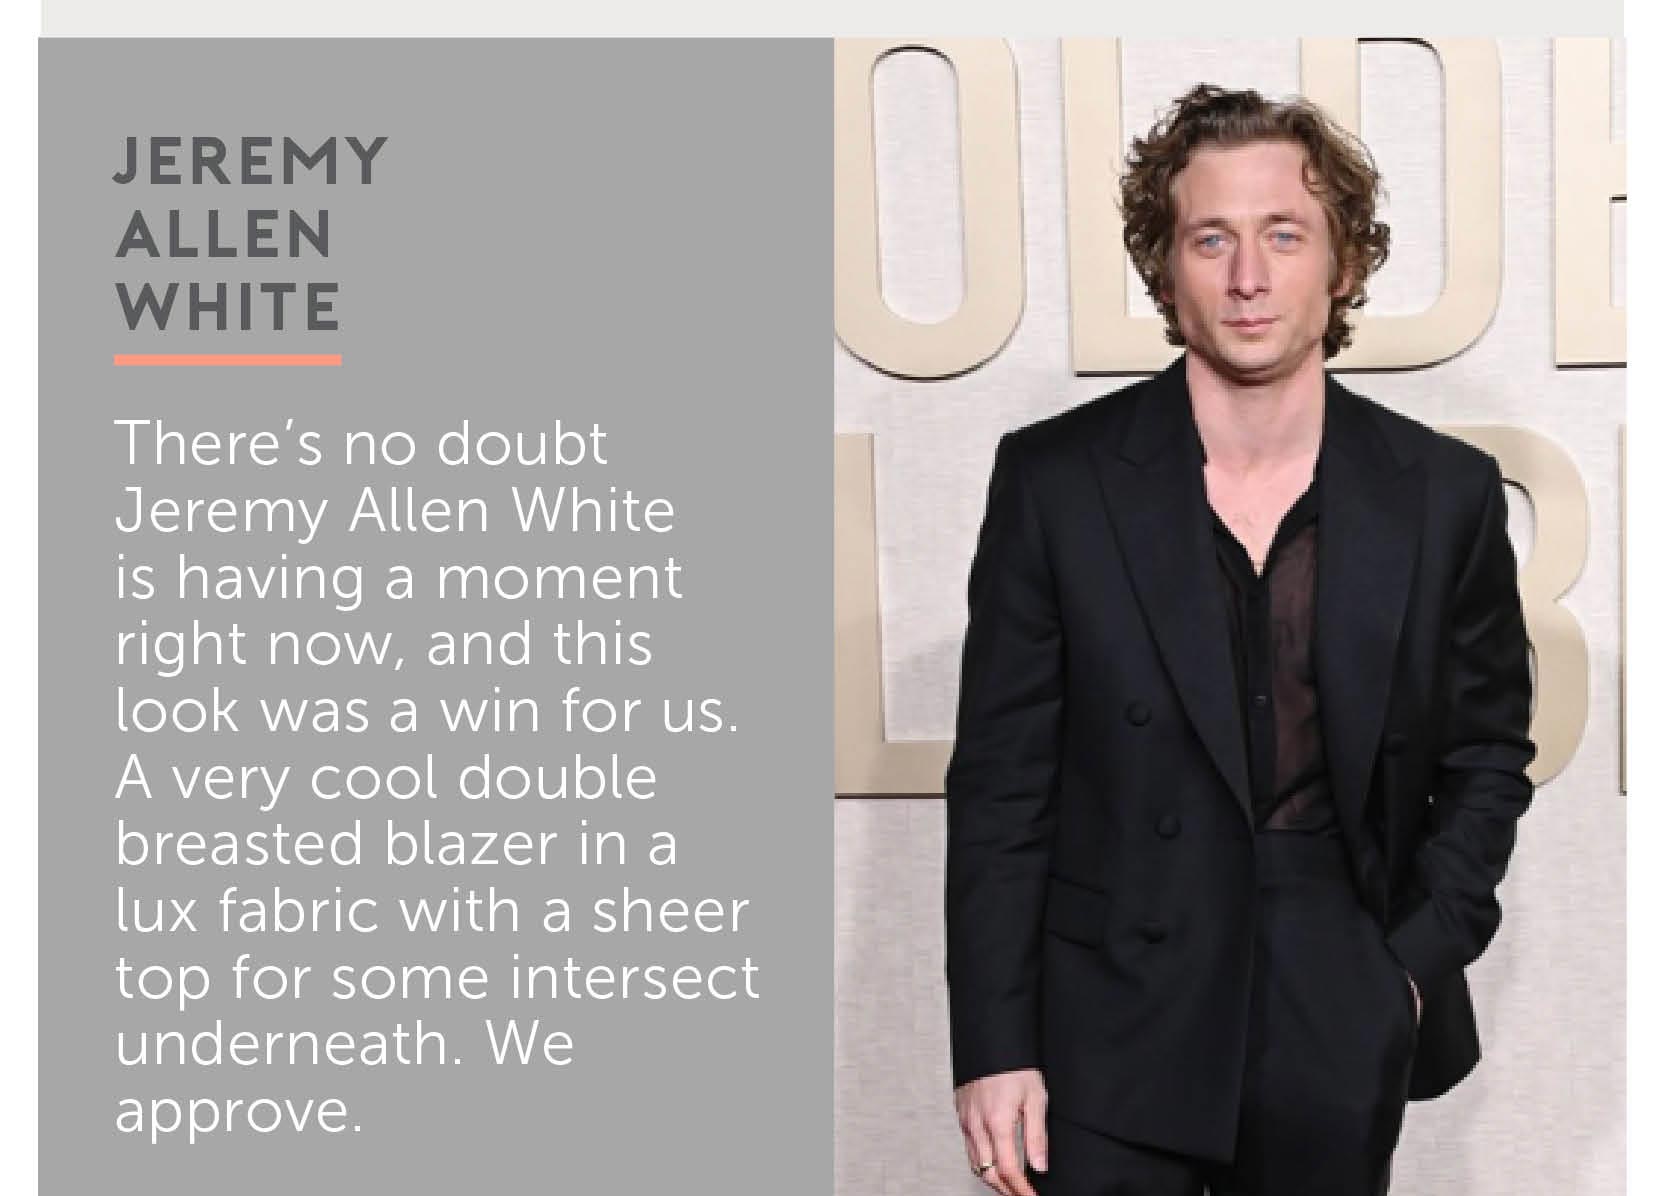 There’s no doubt Jeremy Allen White is having a moment right now, and this look was a win for us. A very cool double breasted blazer in a lux fabric with a sheer top for some intersect underneath. We approve.